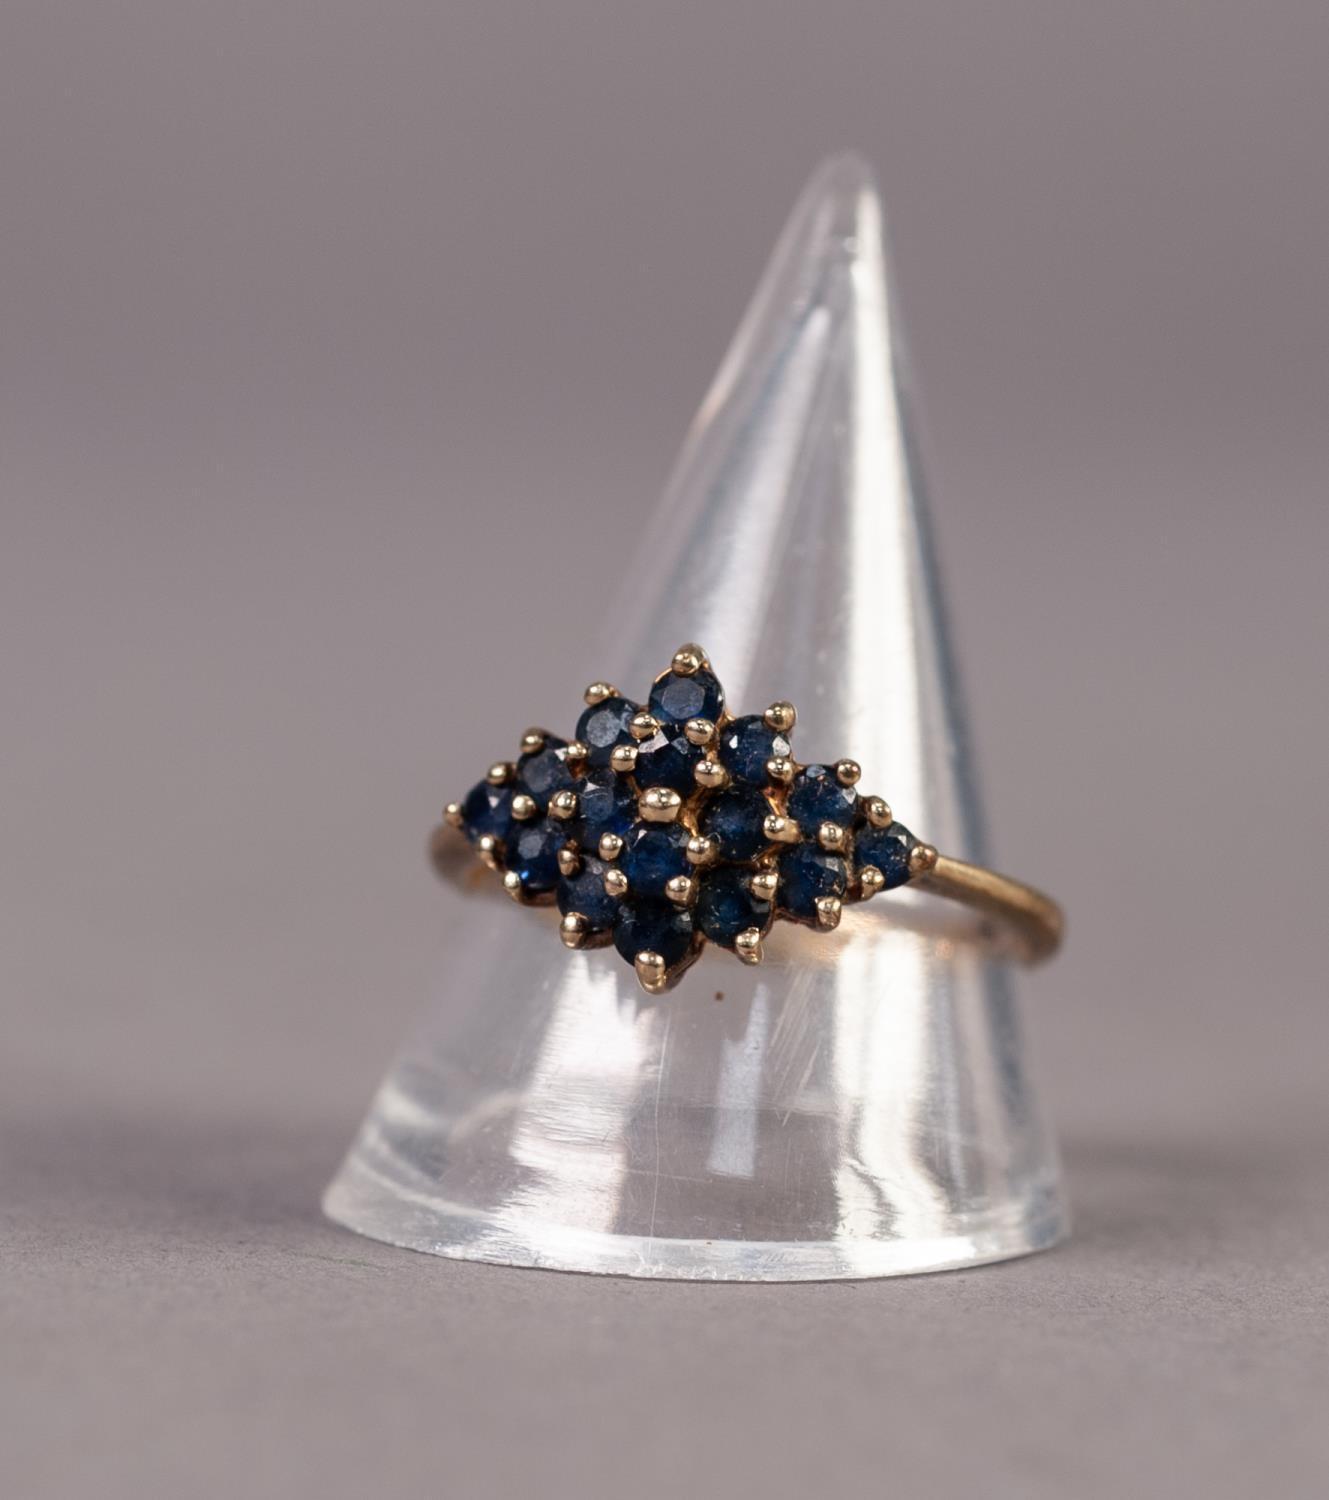 9ct GOLD AND SAPPHIRE RING, the diamond shaped top set with 16 small round sapphires, ring size R/S - Image 2 of 4